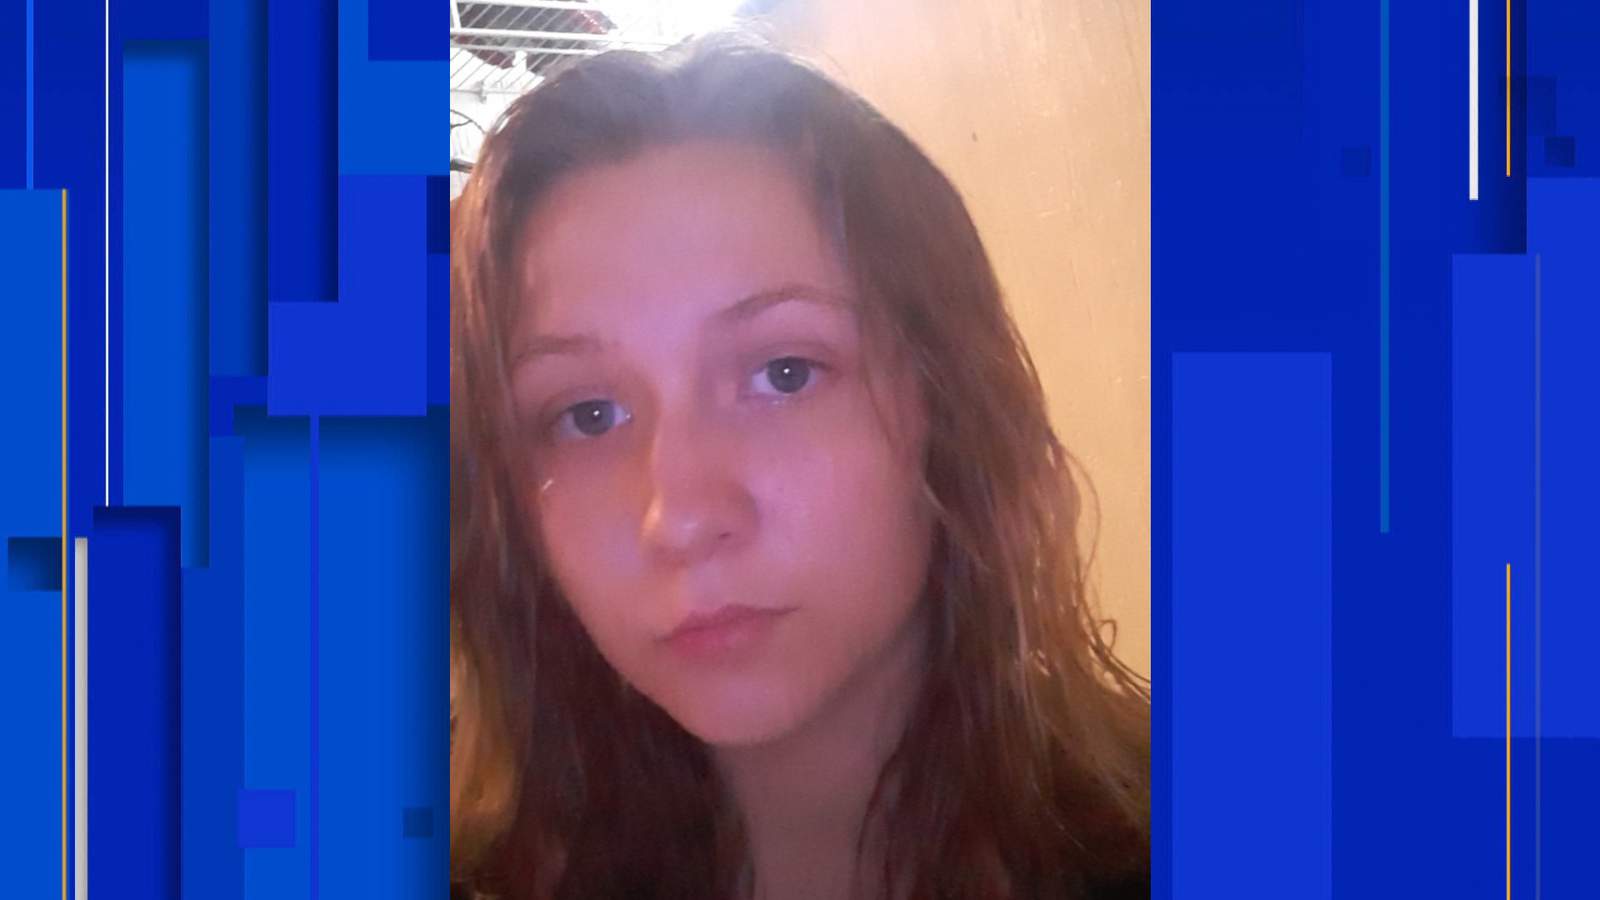 Redford Township police search for missing 13-year-old girl